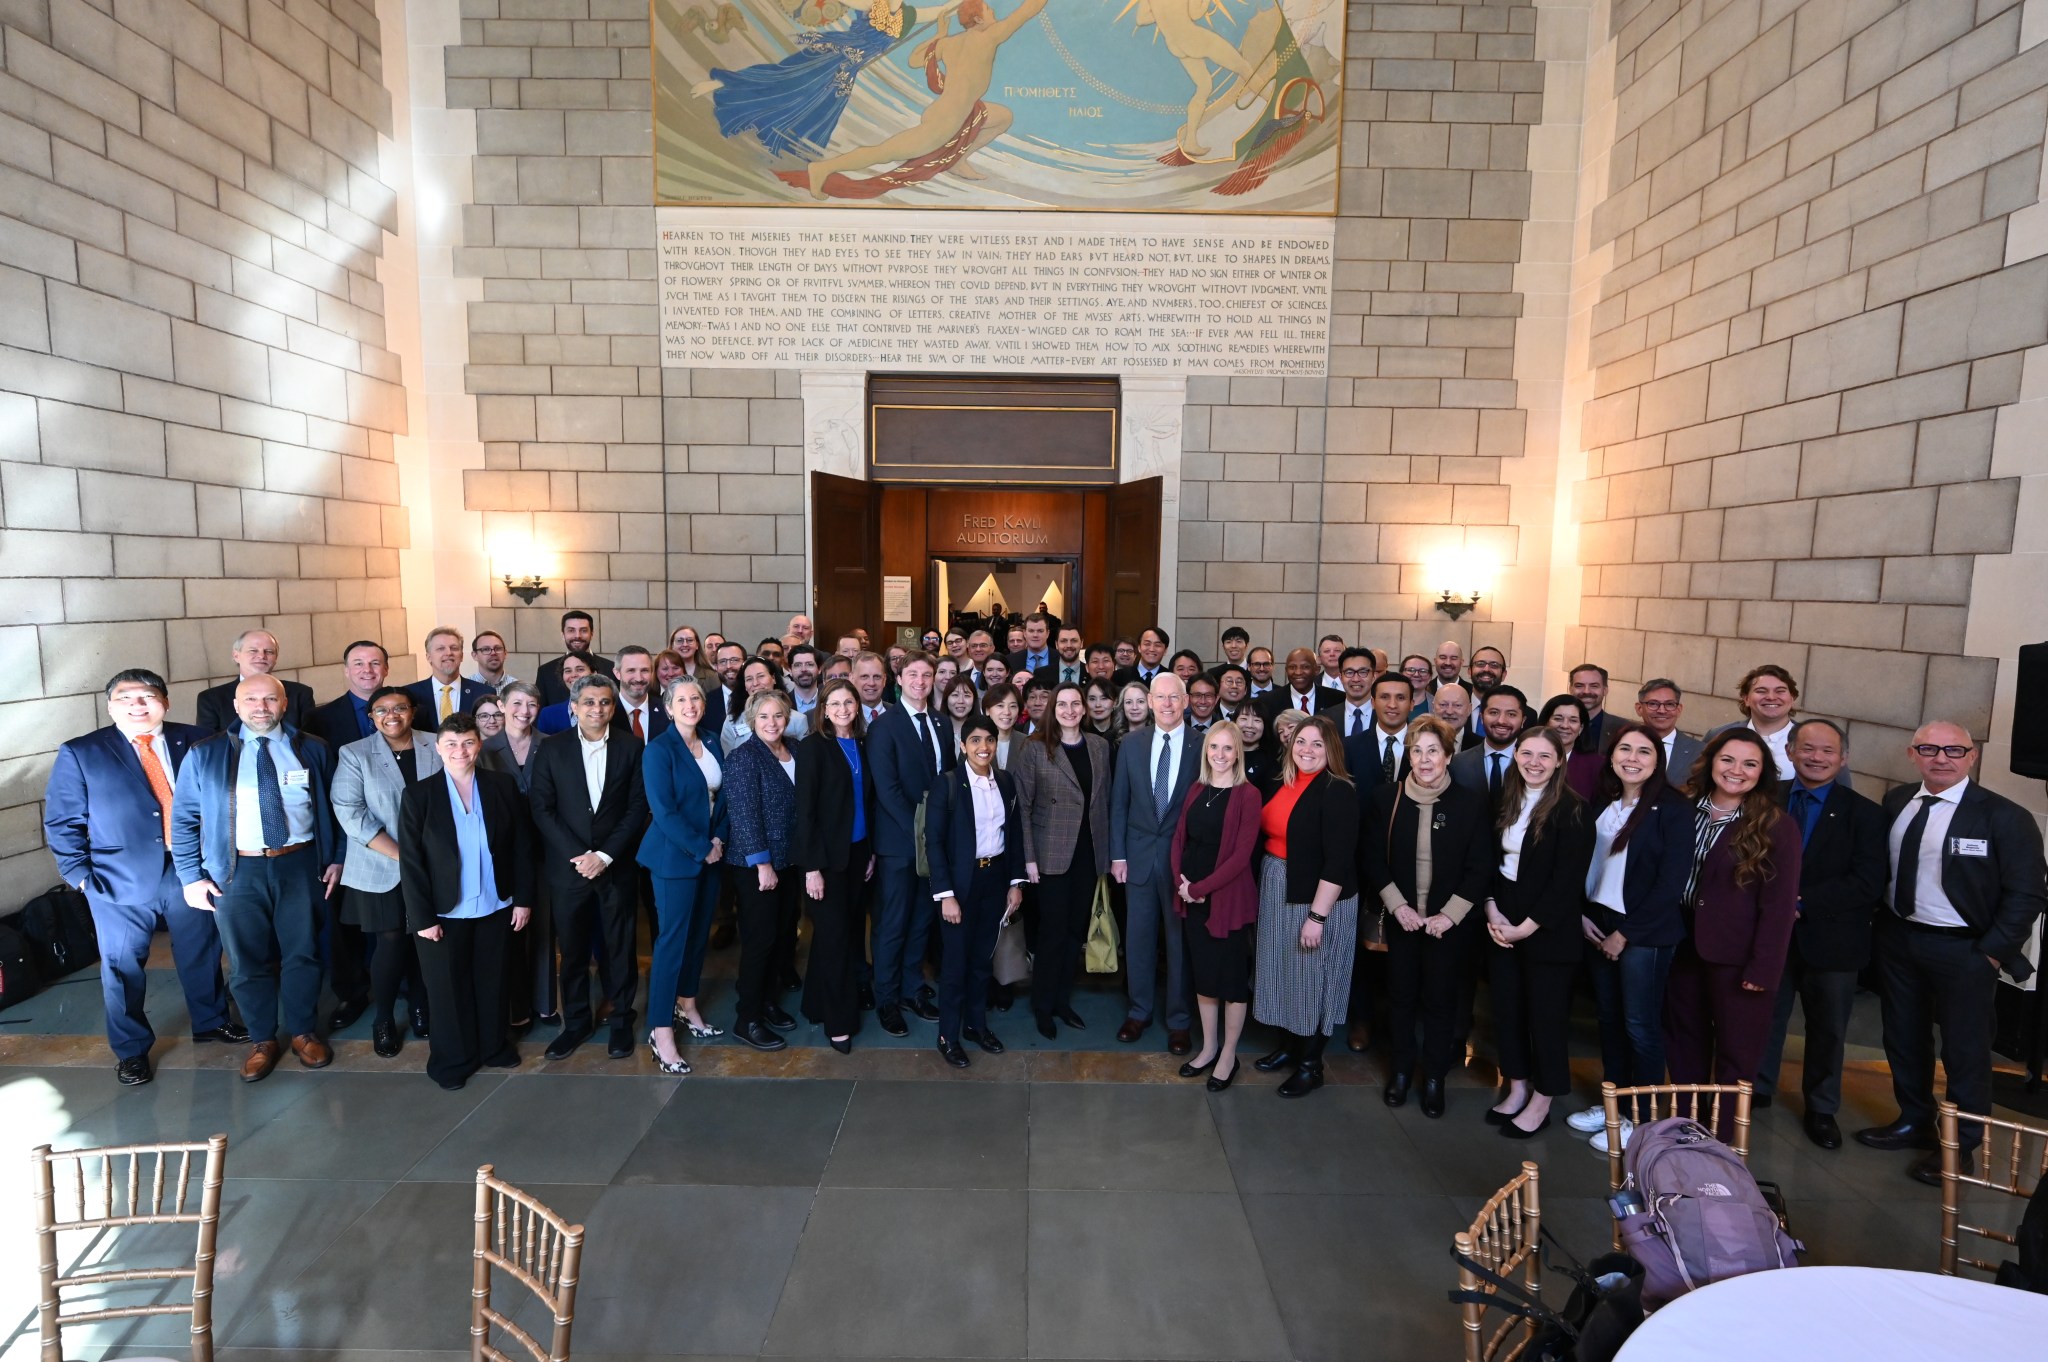 50 attendees representing 18 countries attended the Moon to Mars Architecture Workshop on Feb. 20. In this photo, attendees and NASA personnel gather for a photo in the great hall of the National Academy of Sciences in Washington.